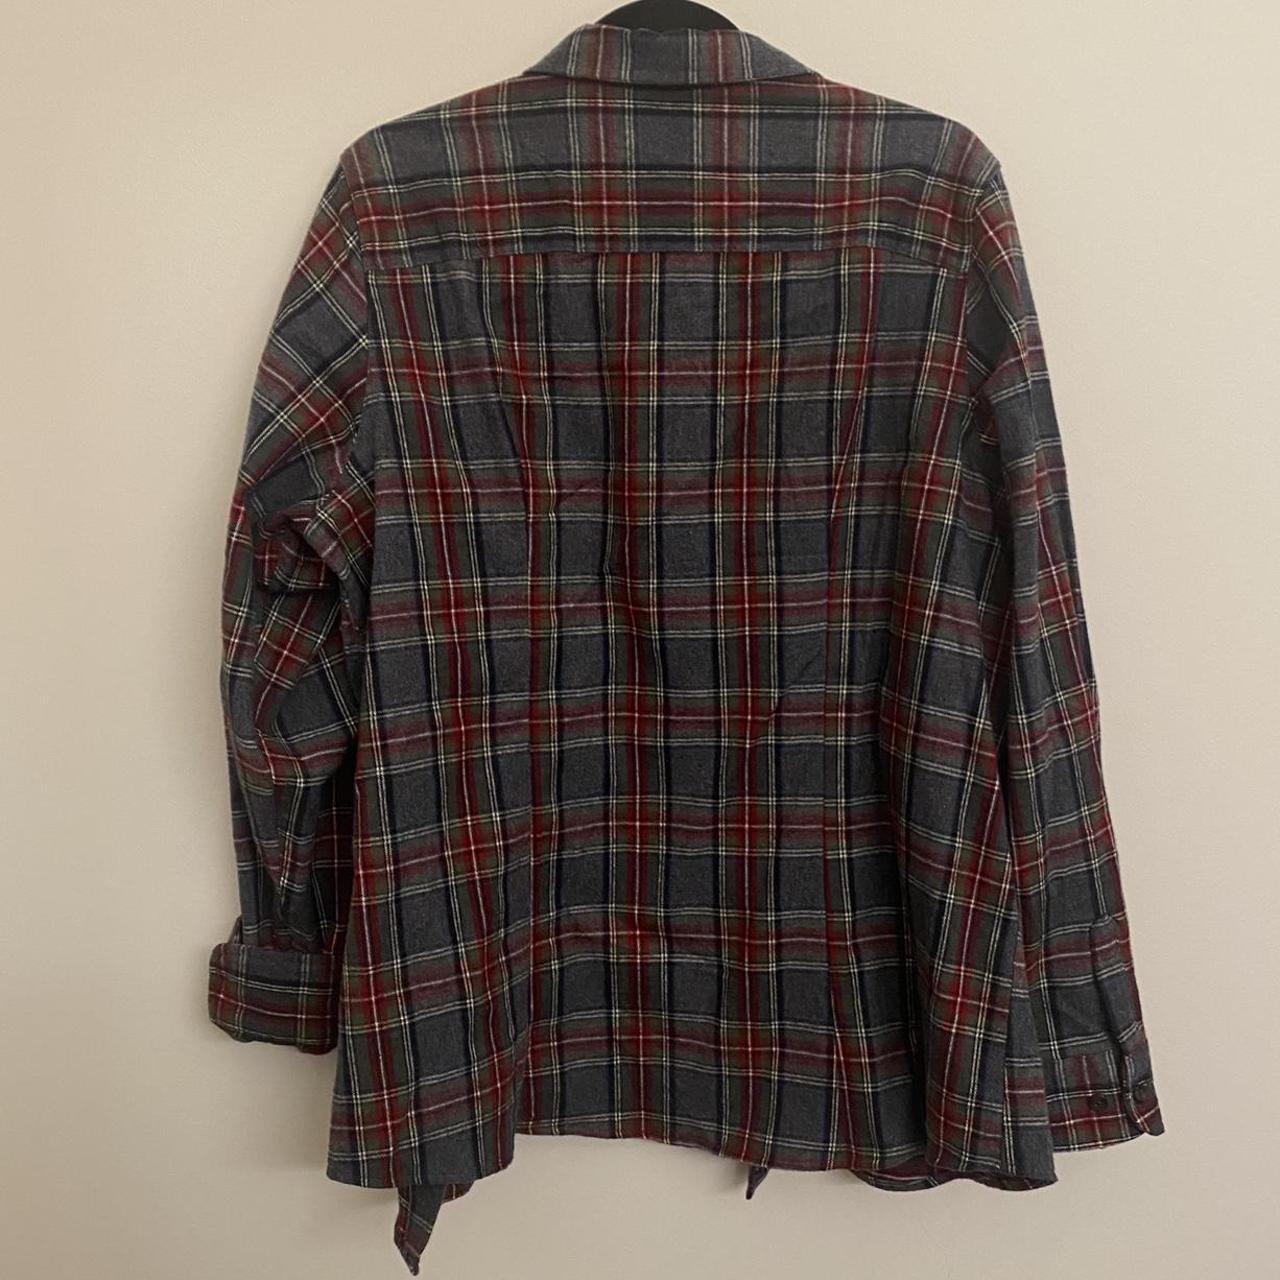 Product Image 4 - Thick & warm flannel from